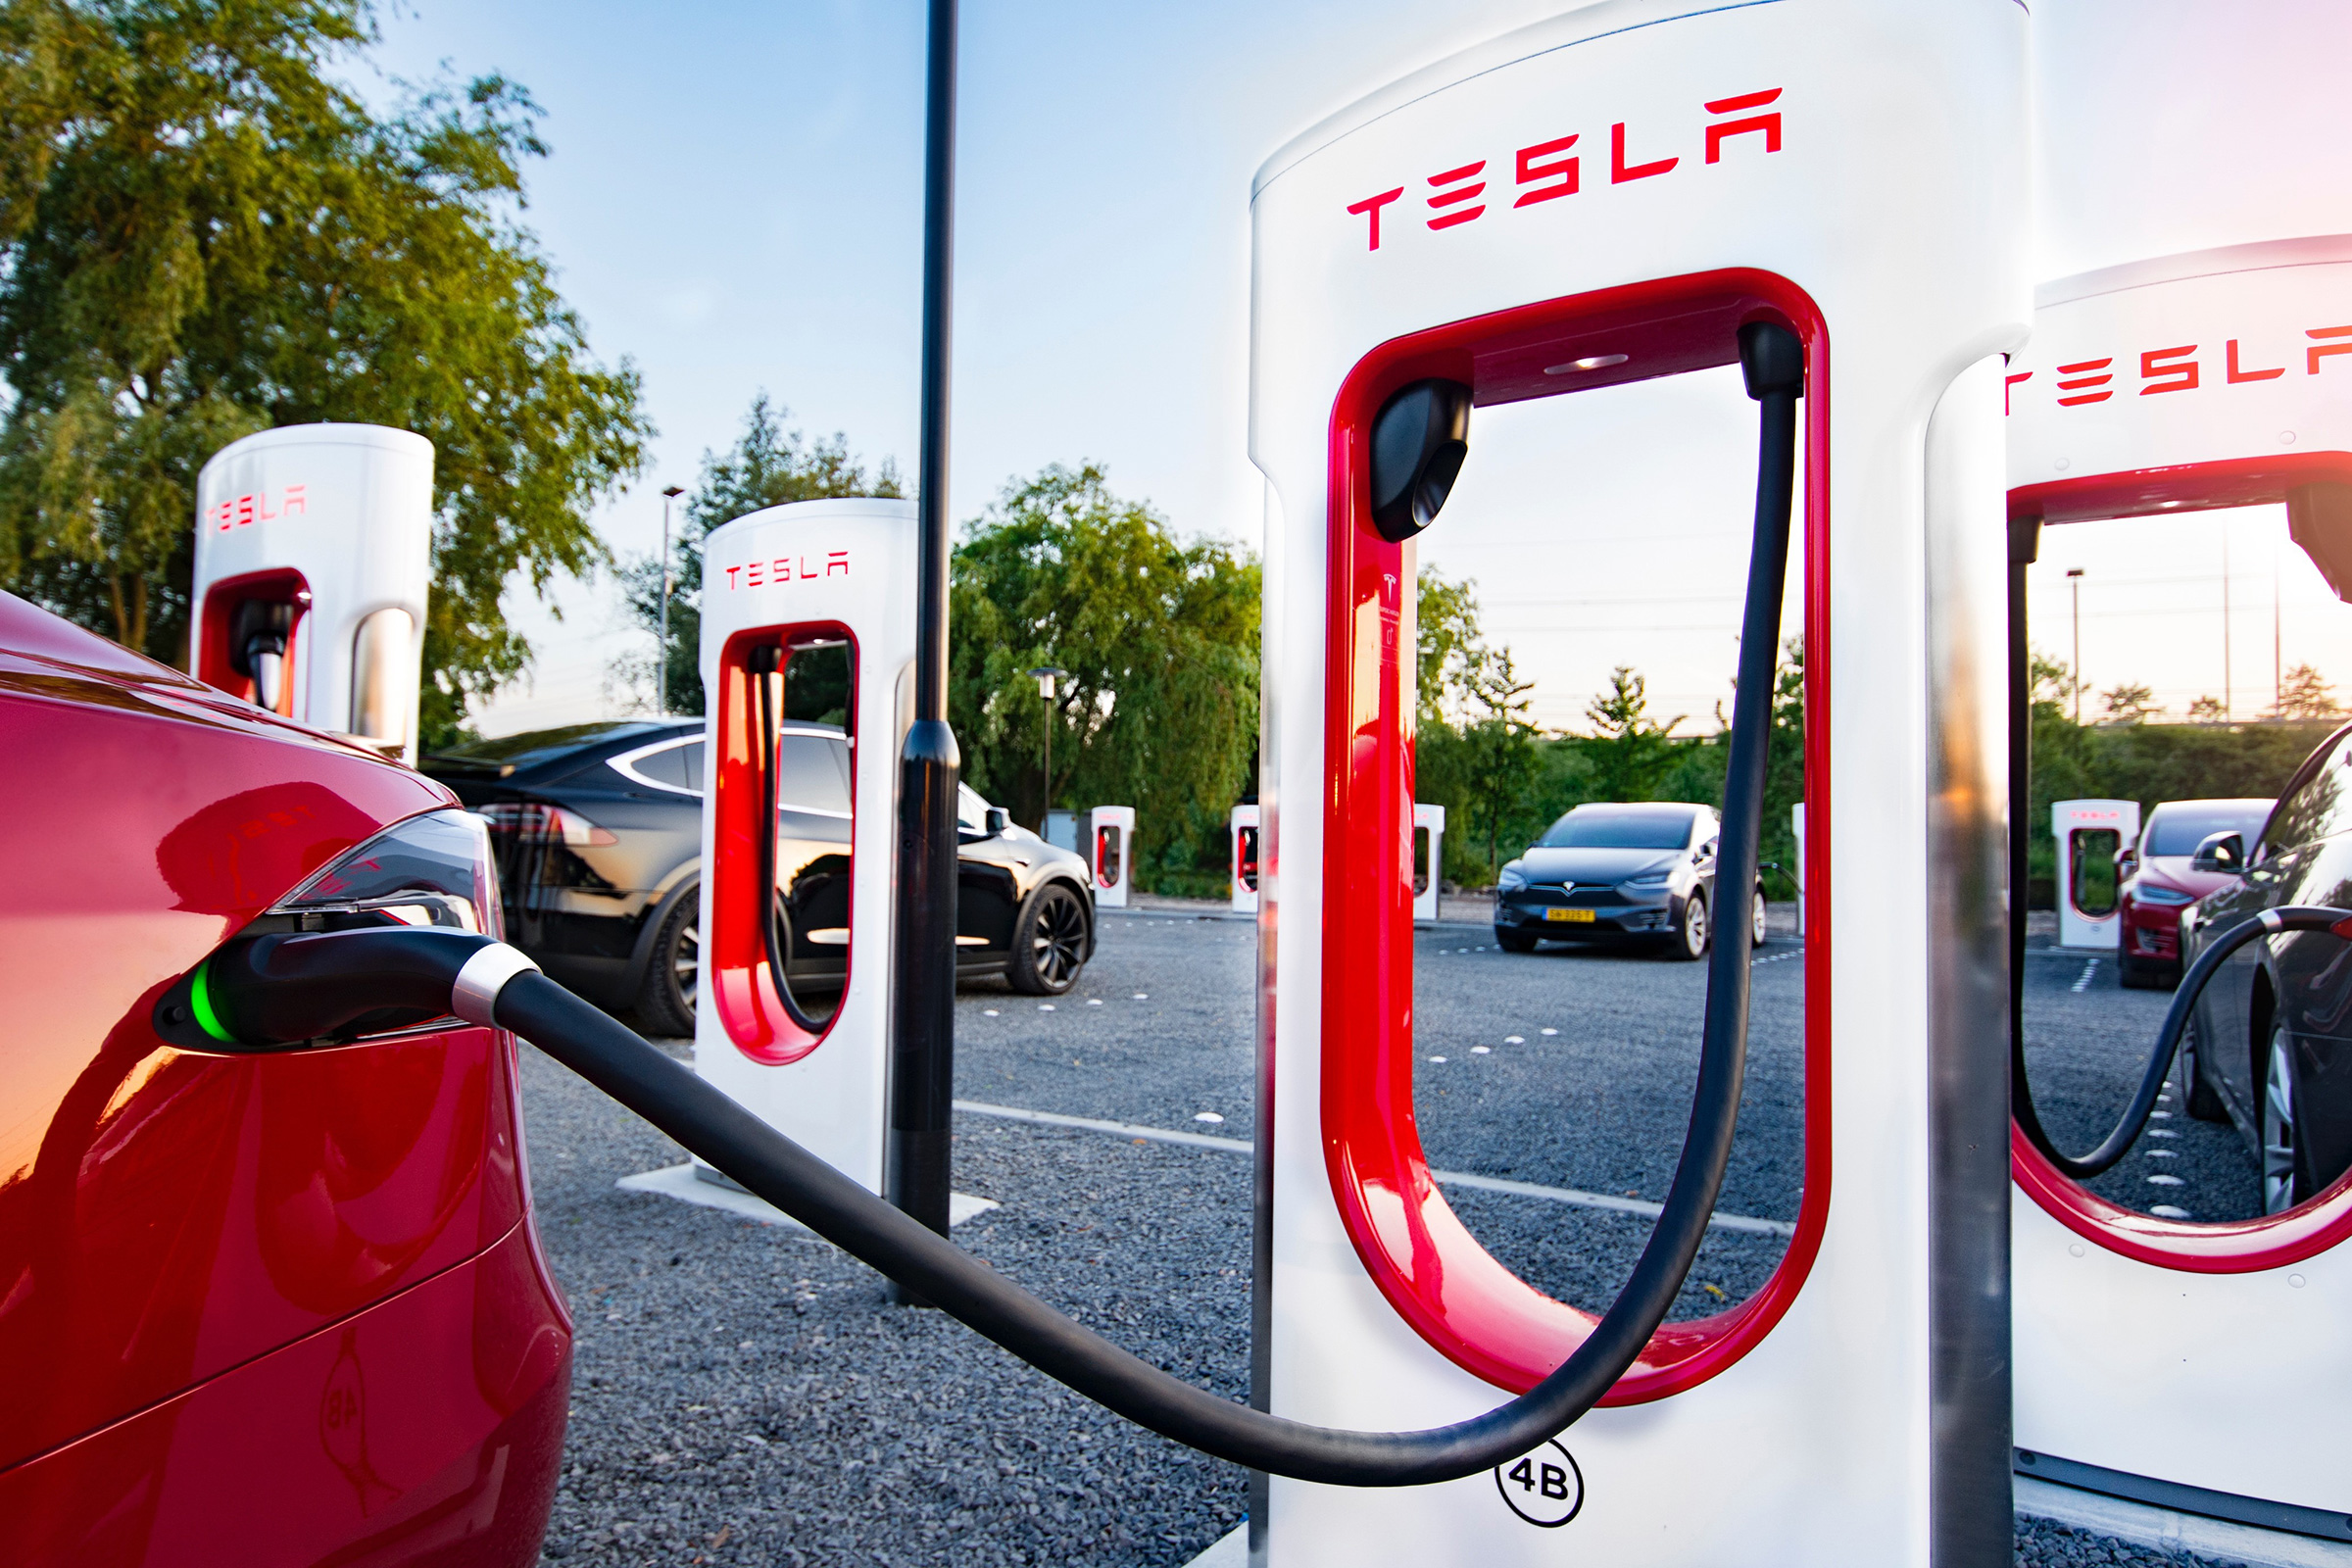 Tesla Charging Stations: A Guide To The Tesla Supercharger Network | Drivingelectric